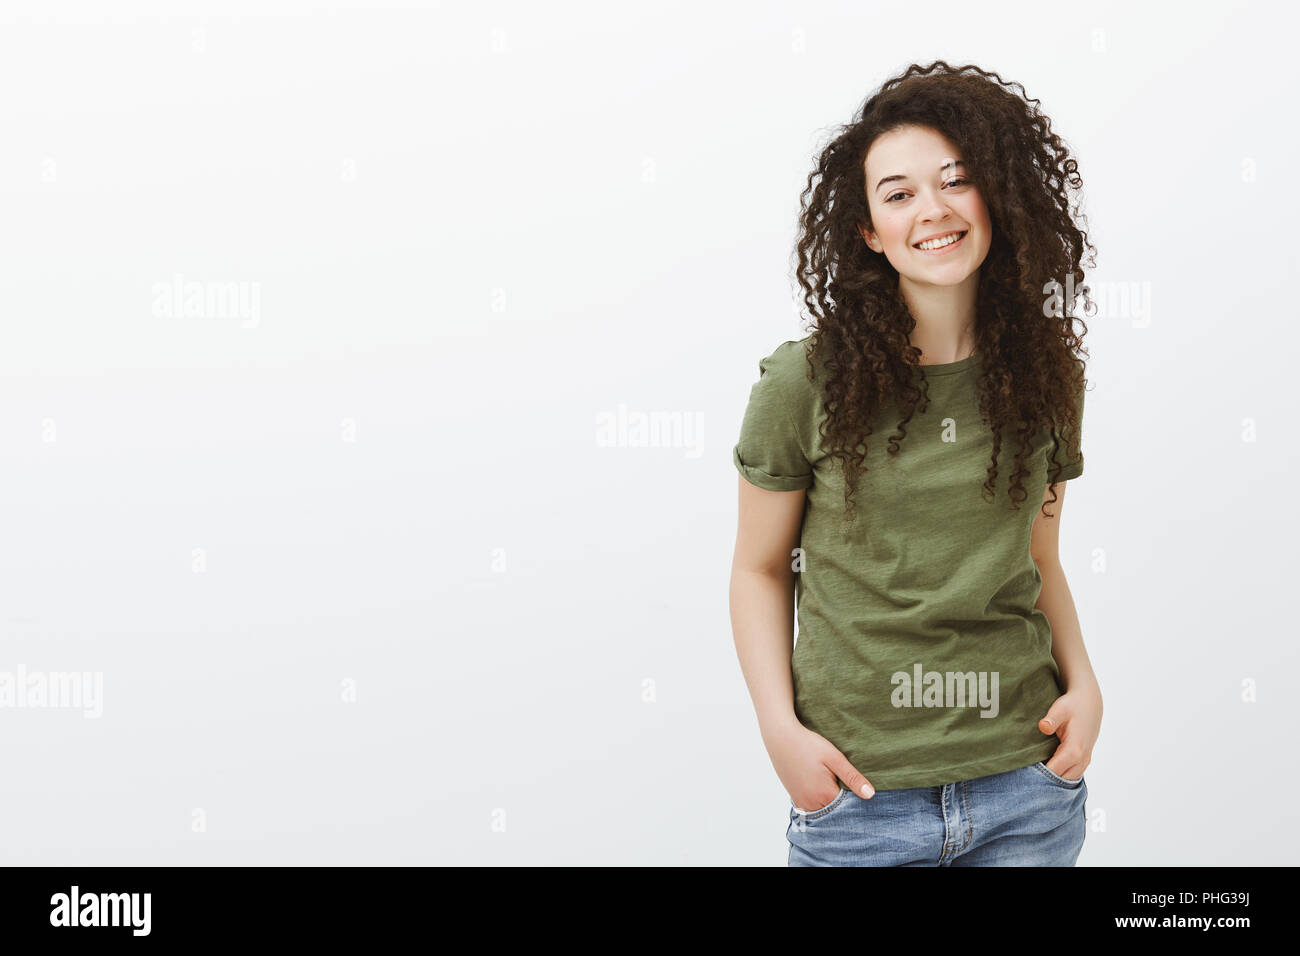 Portrait of joyful good-looking adult woman with curly hair, hanging out over gray background, holding hands in pockets and smiling with happy friendly attitude, talking casually with friends Stock Photo